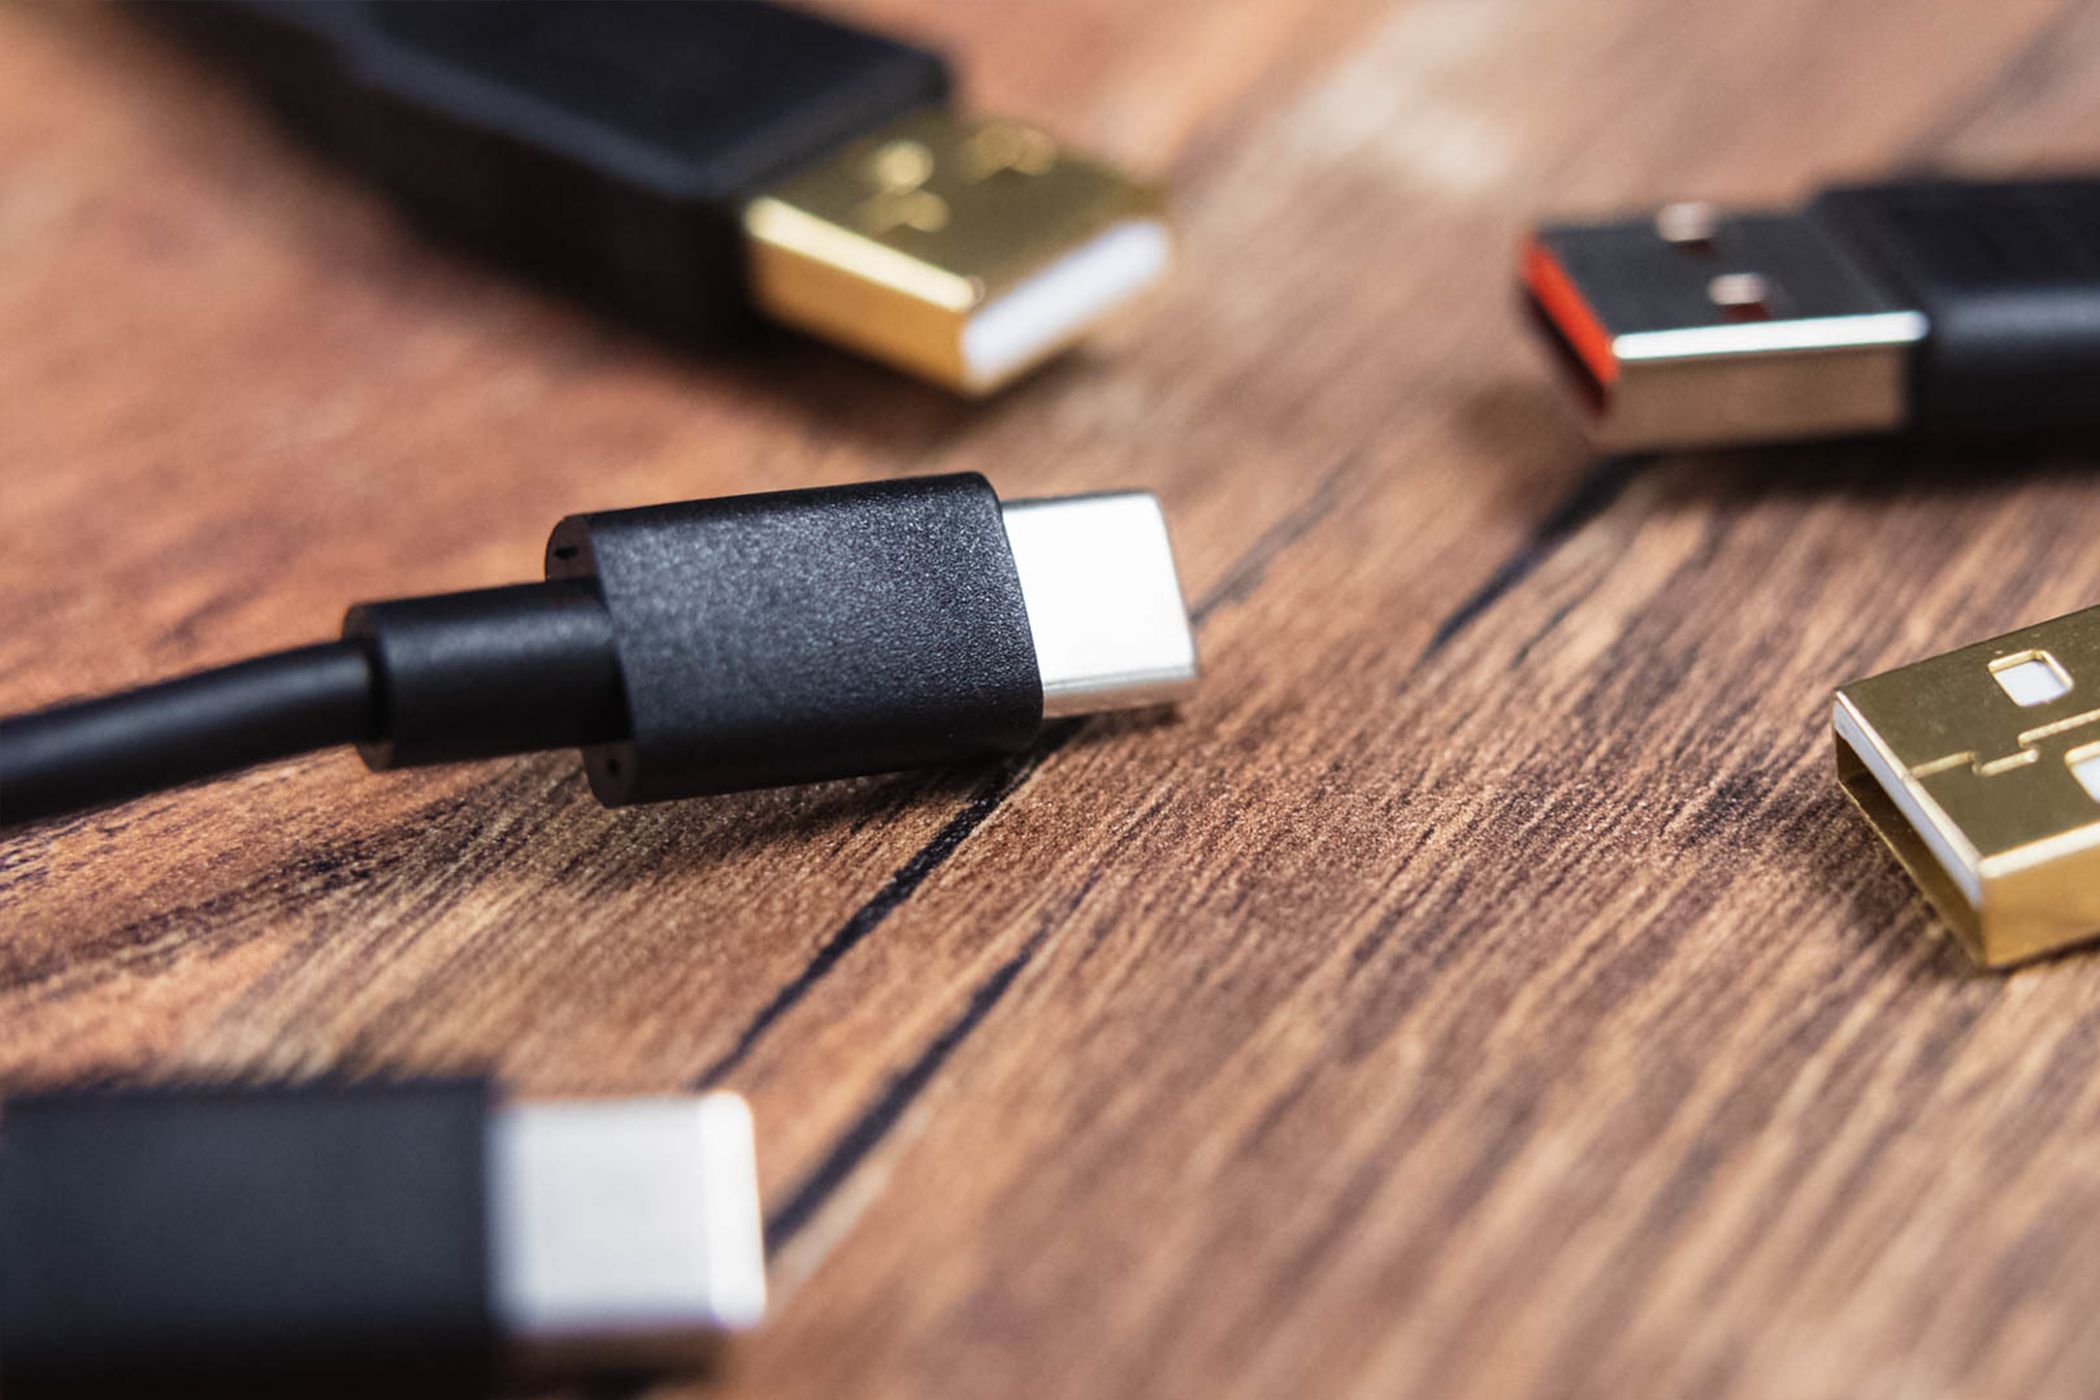 Can Old or Cheap USB Cables Damage Your Devices?